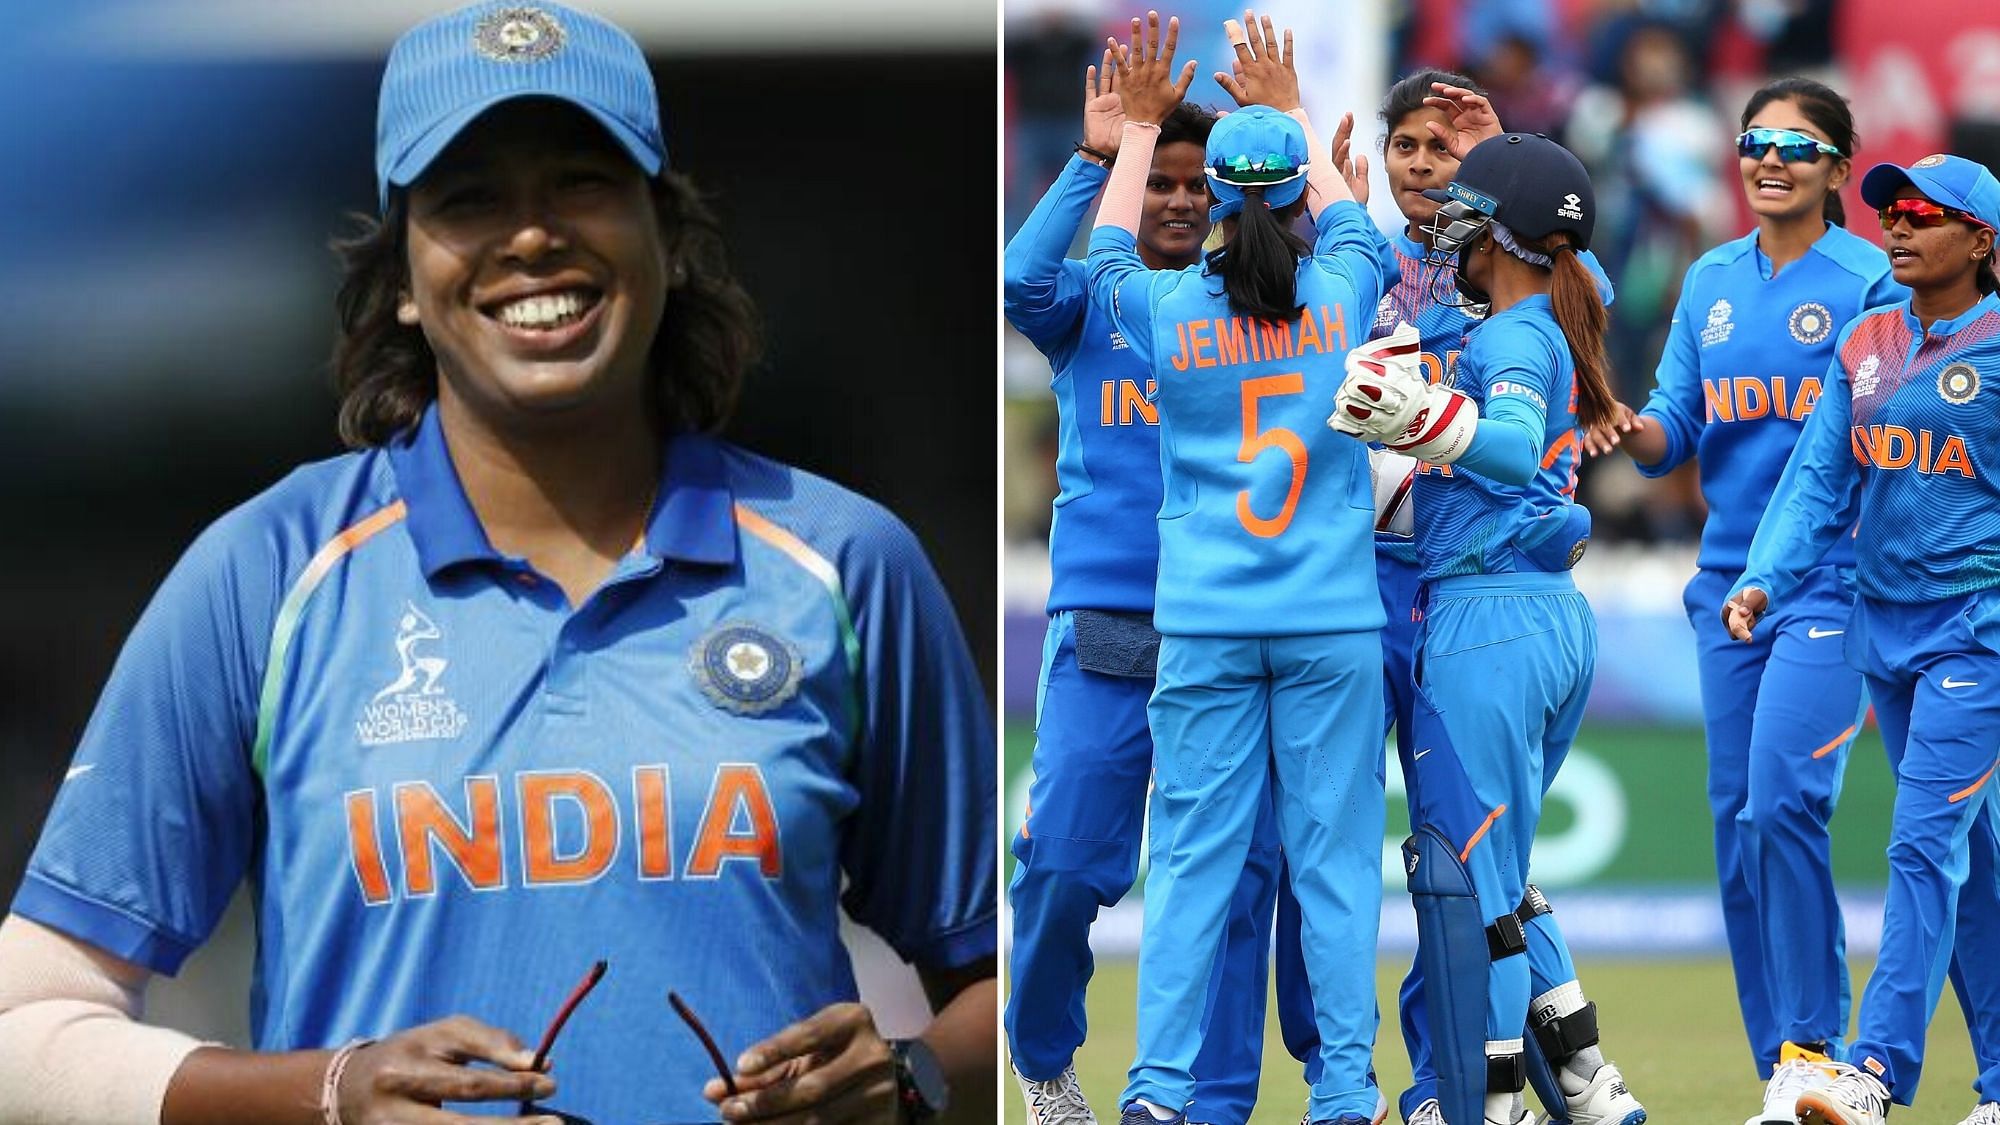 Jhulan Goswami was part of India’s gut-wrenching 2017 50-over World Cup final loss to England at Lord’s.